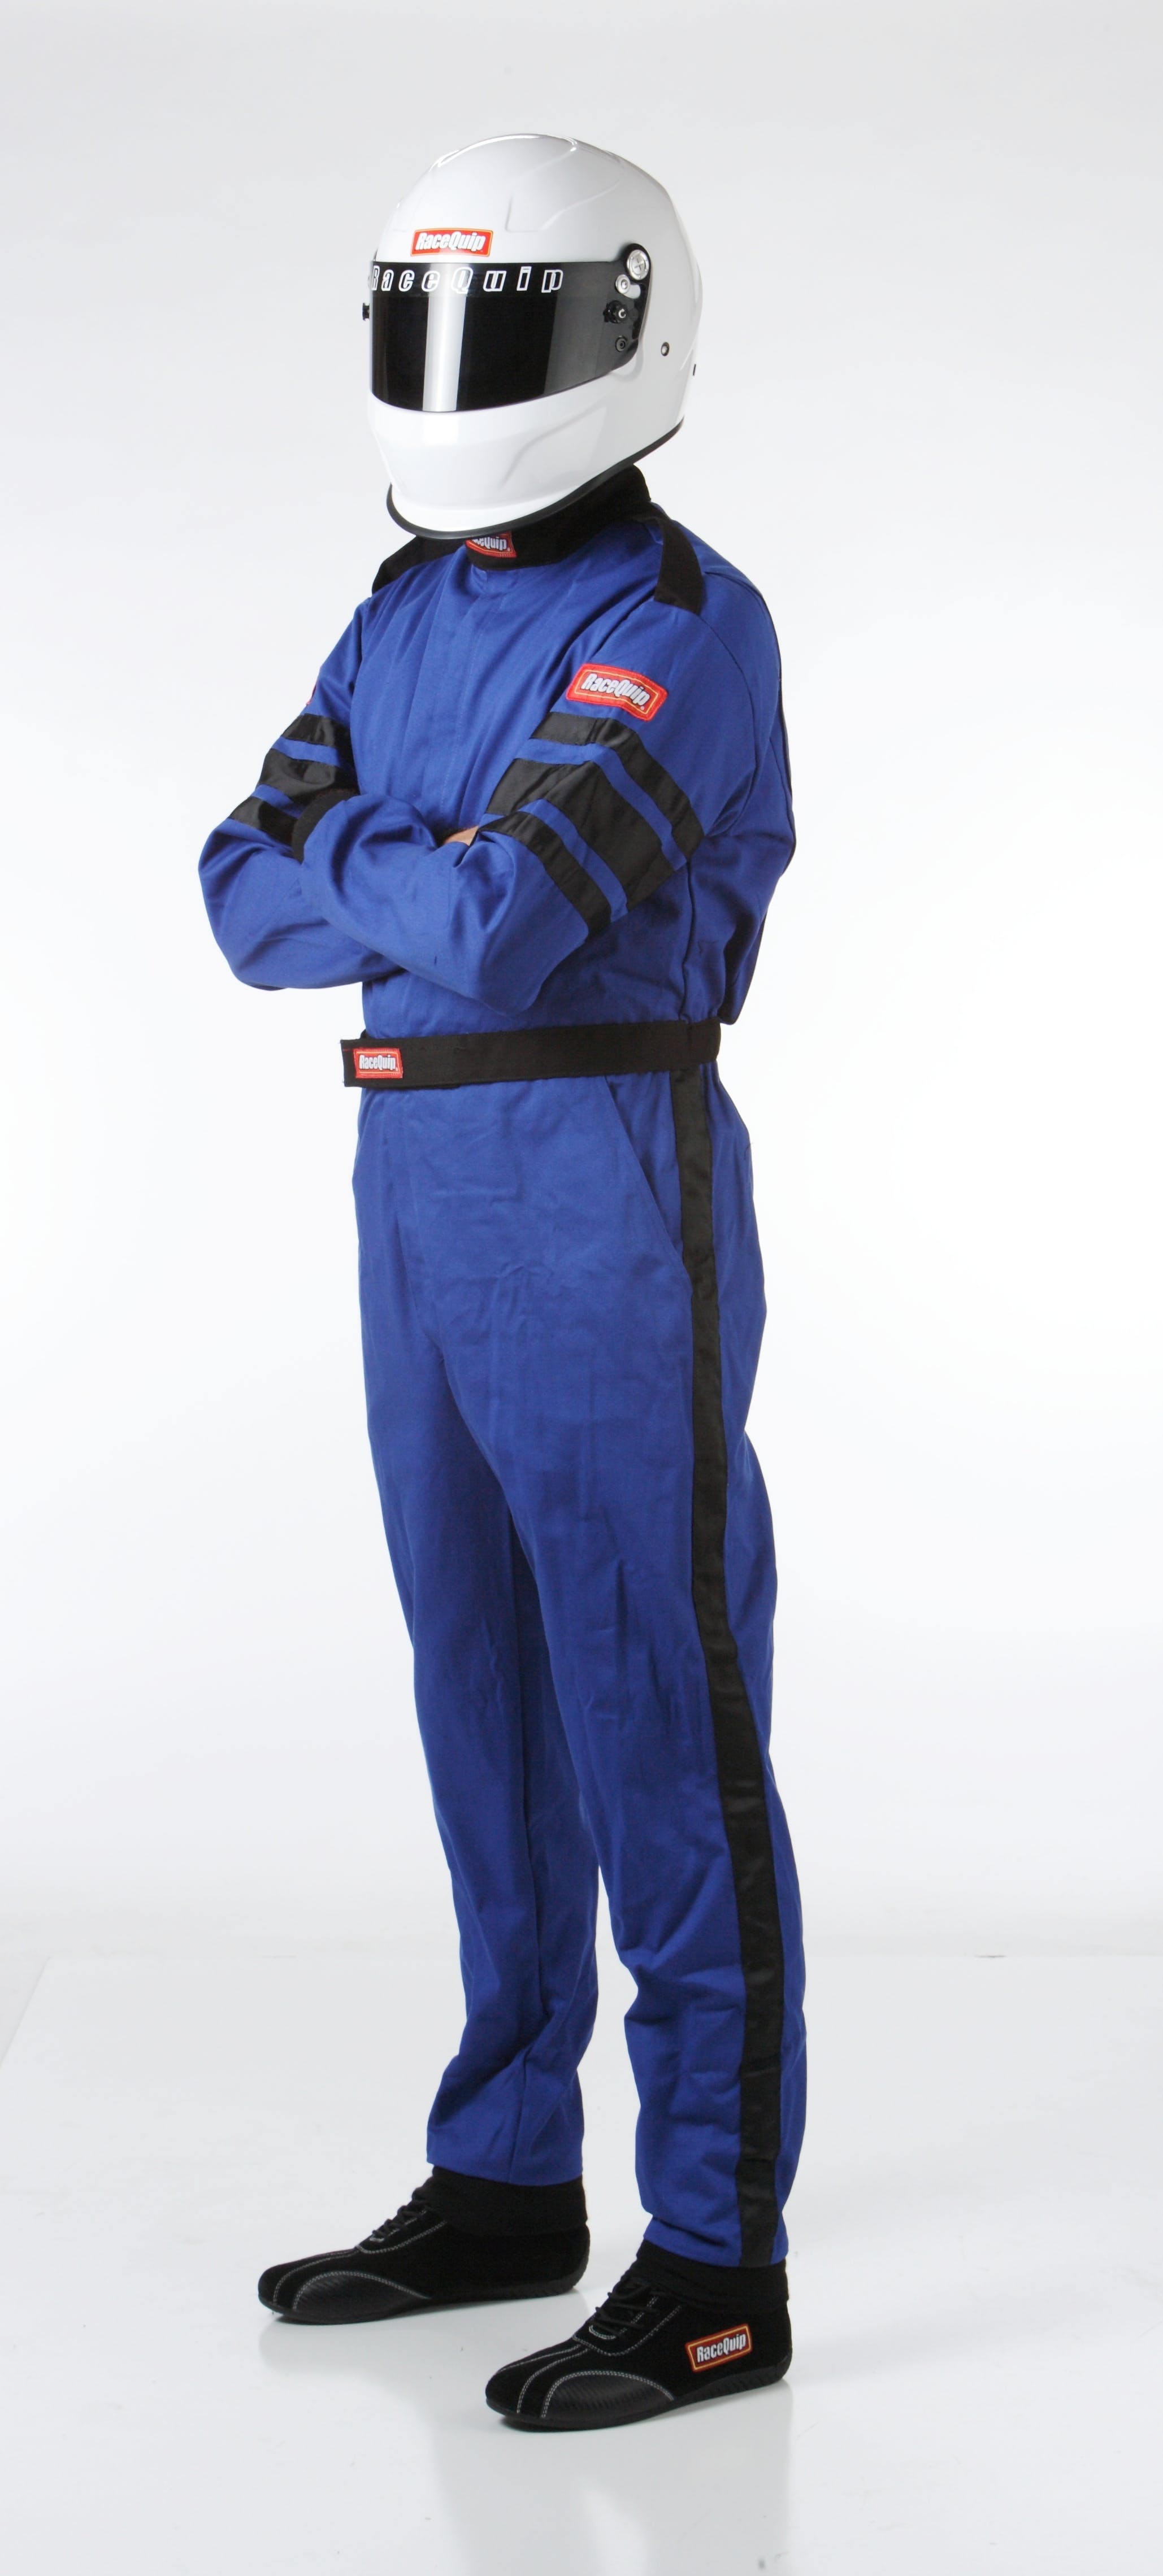 RaceQuip 110027 SFI-1 Pyrovatex One-Piece Single-Layer Racing Fire Suit (Blue, XX-Large)